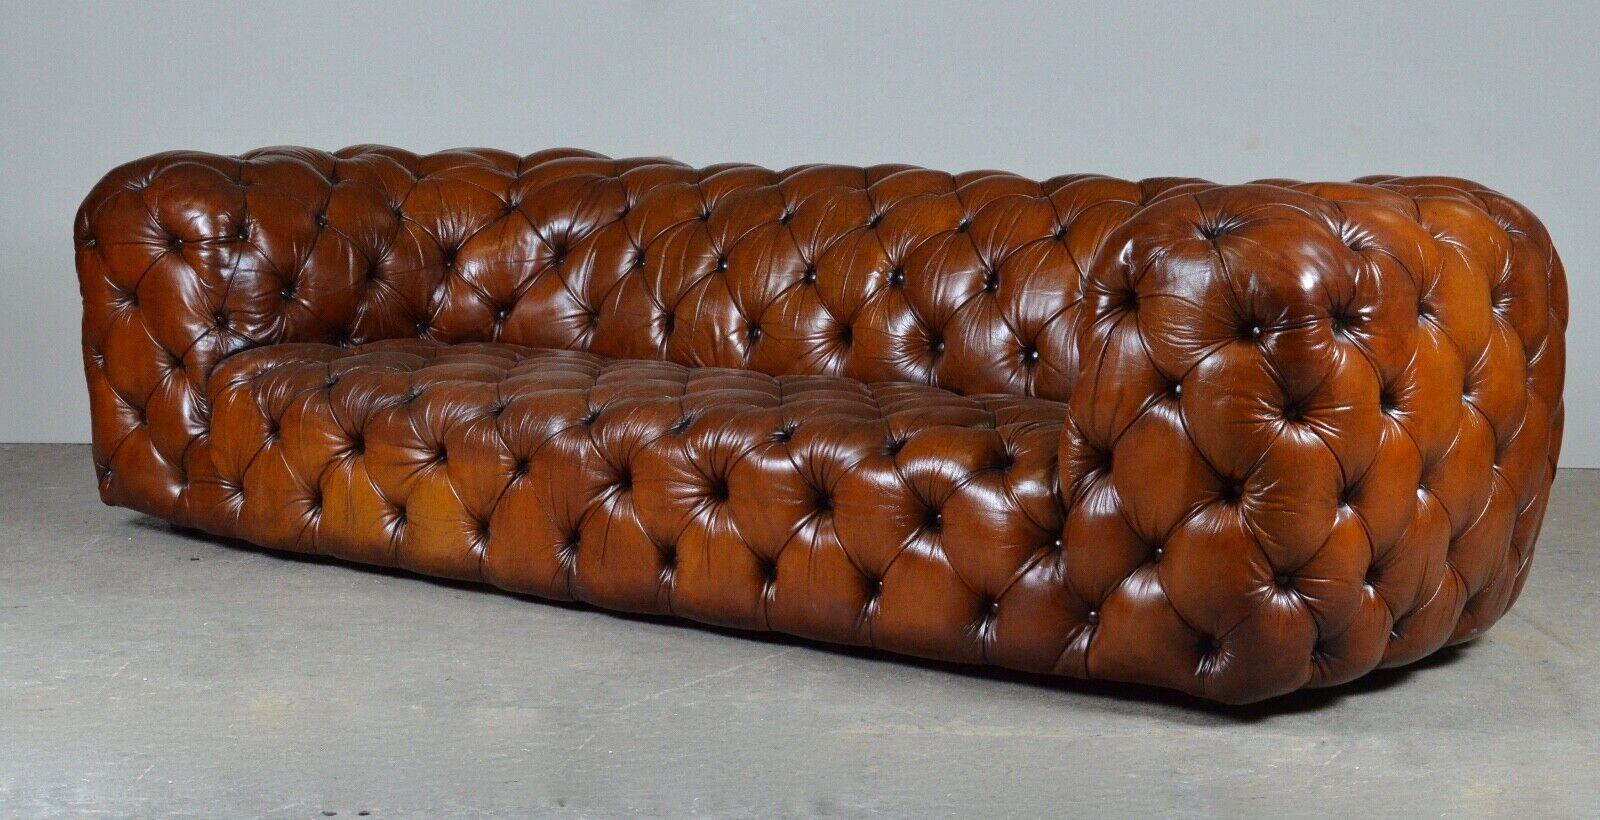 We are delighted to offer for sale this lovely Timothy Oulton Tribeca tufted 3 Seat sofa.
Absolutely stunning, fully restored, hand-dyed whiskey brown leather.
The sofa has been fully restored including having the old colour stripped out, then